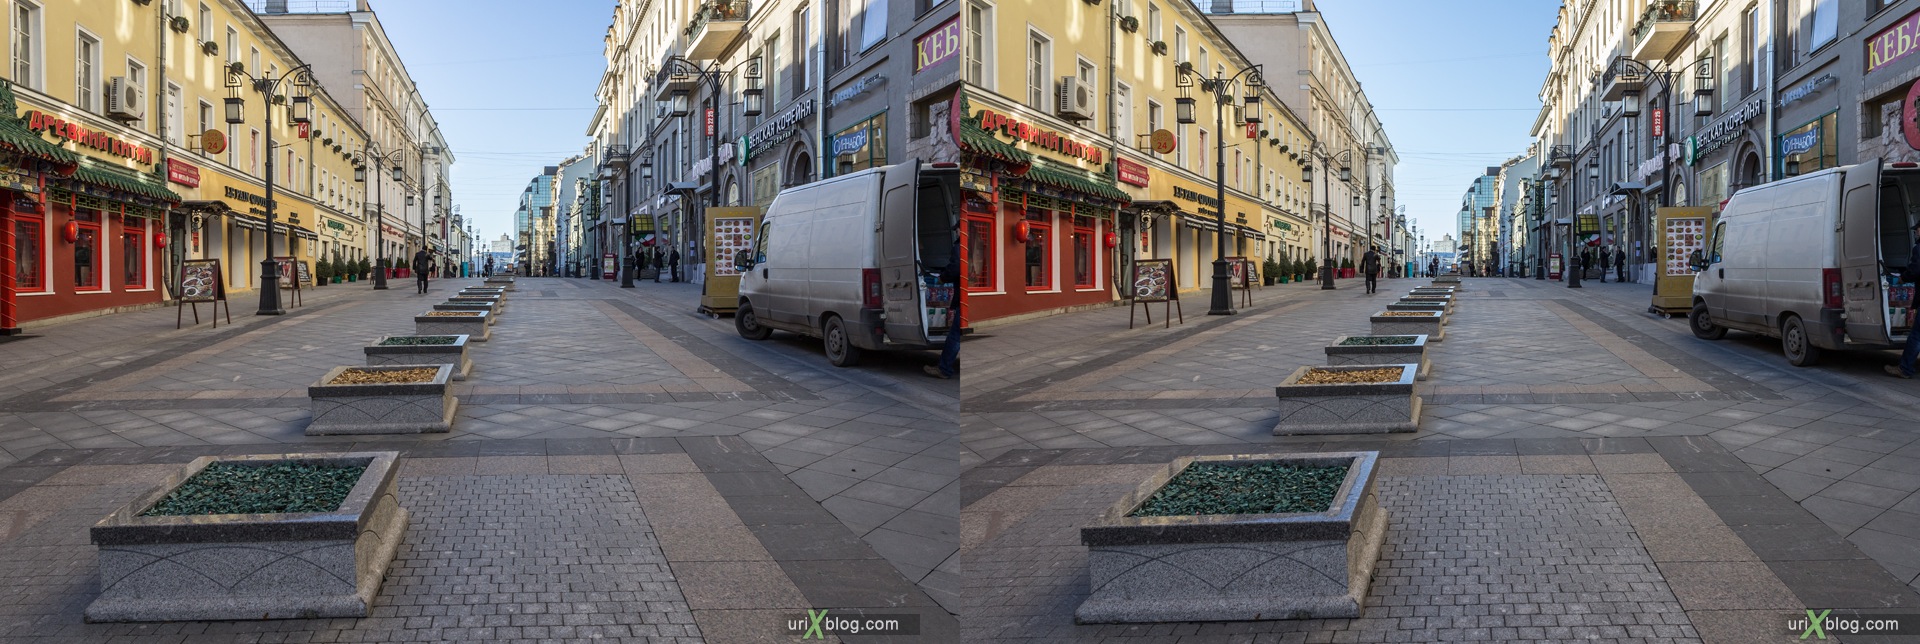 2013, Moscow, Russia, Kamergersky alley, street, new pedestrian zone, 3D, stereo pair, cross-eyed, crossview, cross view stereo pair, stereoscopic